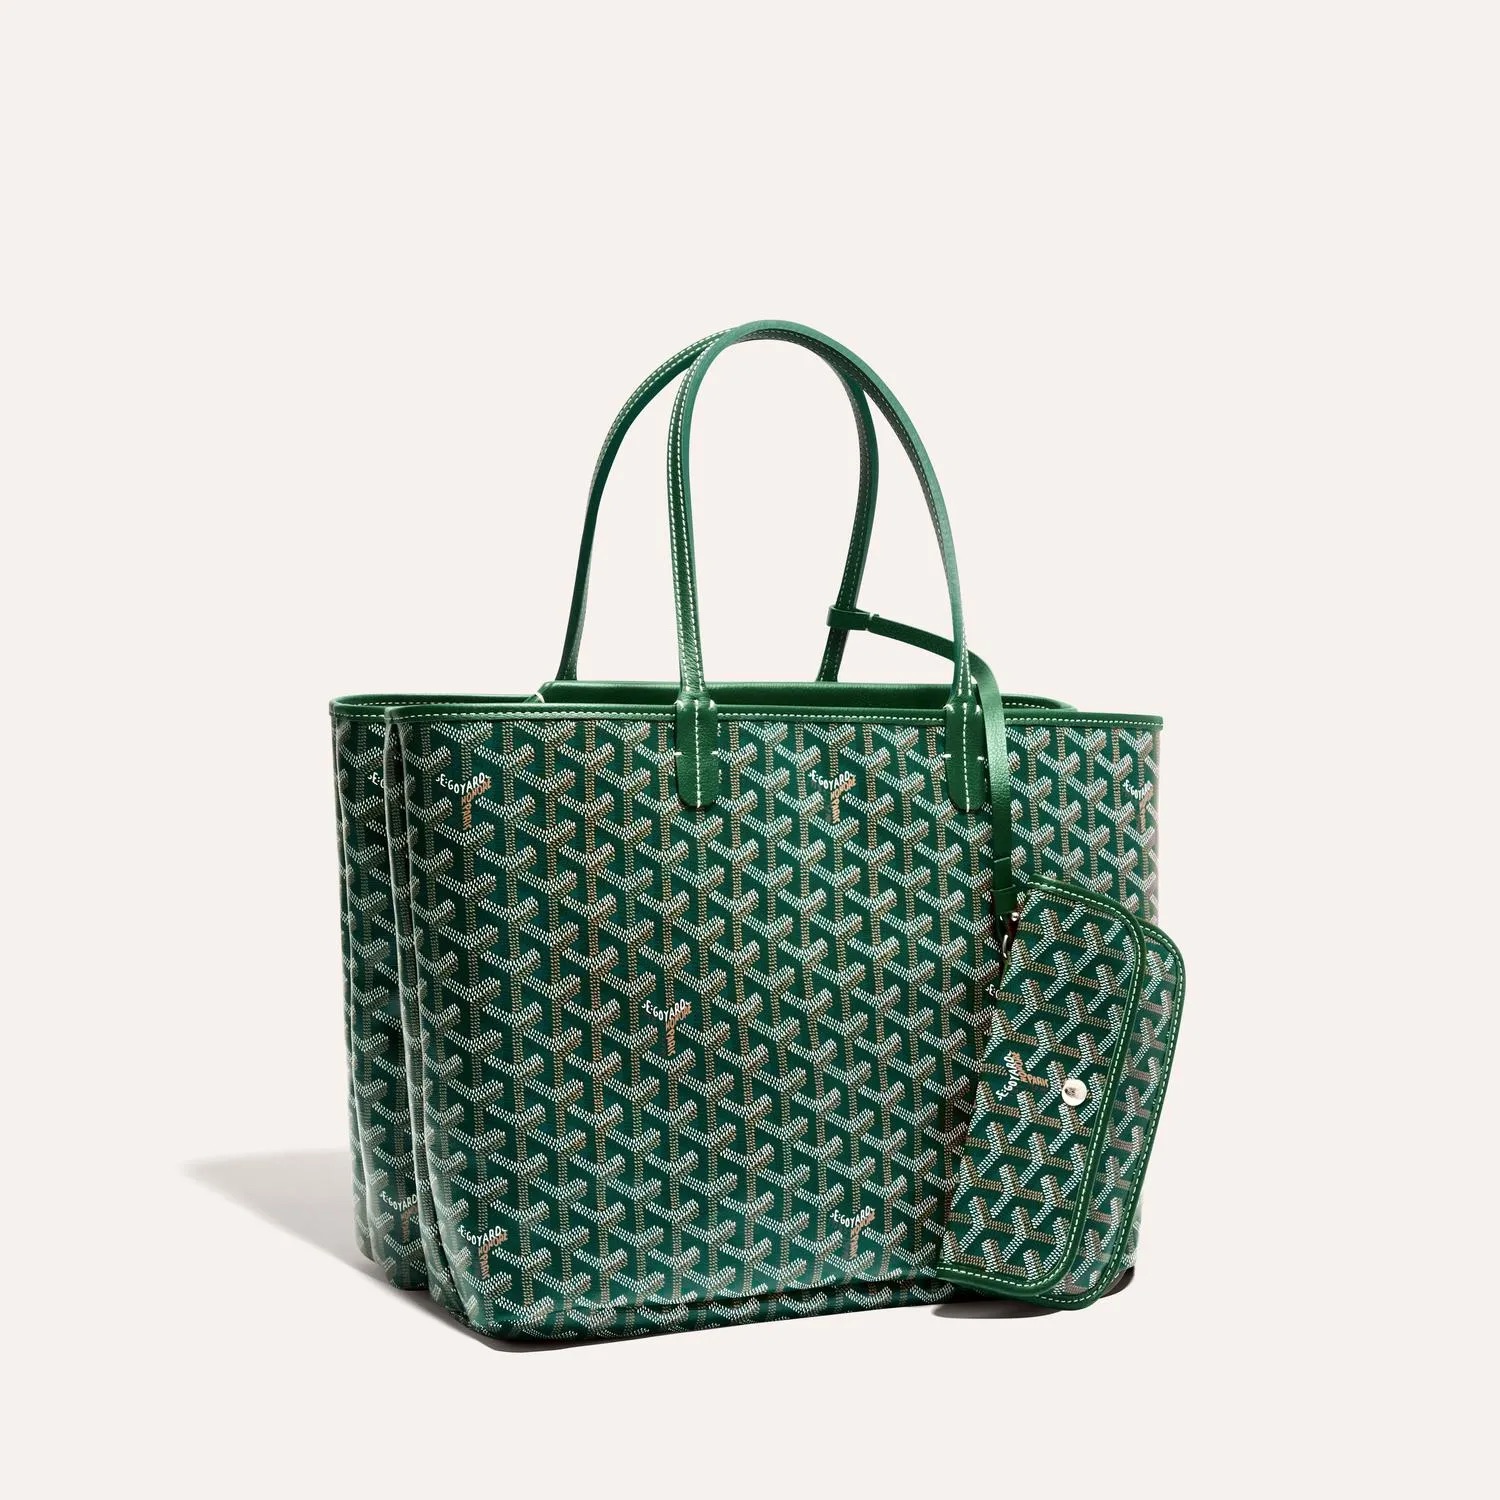 10 Things You Need to Know About Goyard's Iconic Handbag History